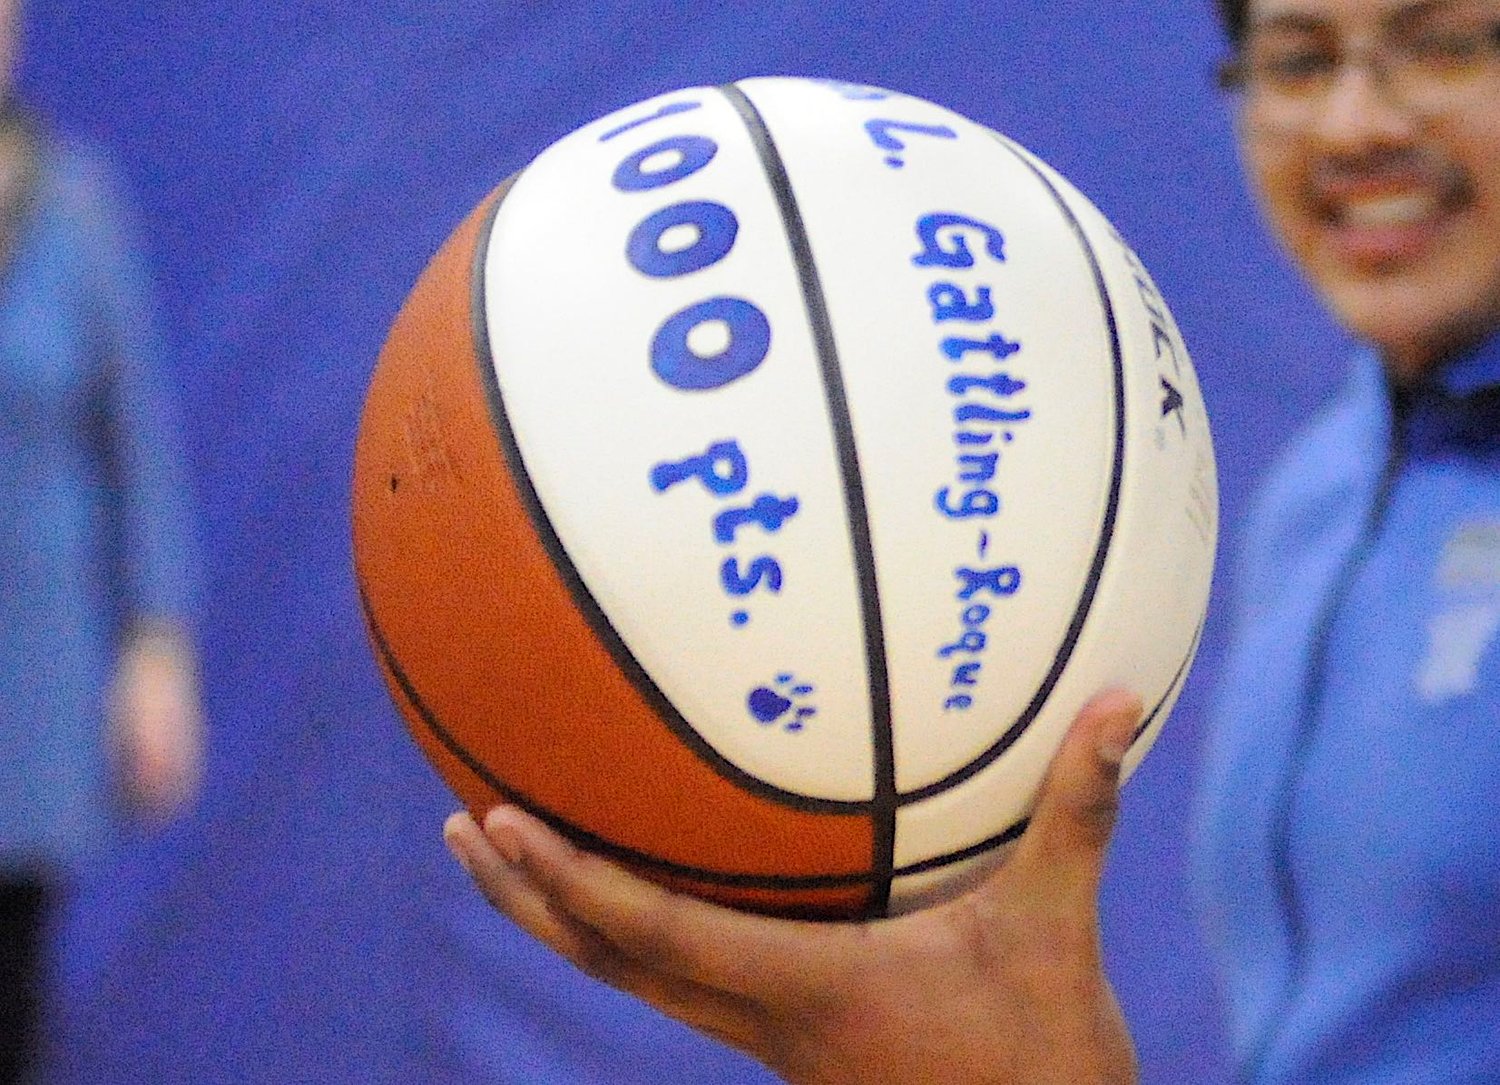 The sweet sphere of success. Monticello’s Josh Gattling posted the 1,000th point of his illustrious high school basketball career during the Panthers’ 91-48 win over Sullivan West. Gattling led his team with 19 points, including a 3-pointer and 4-of-9 shots from the free-throw line.